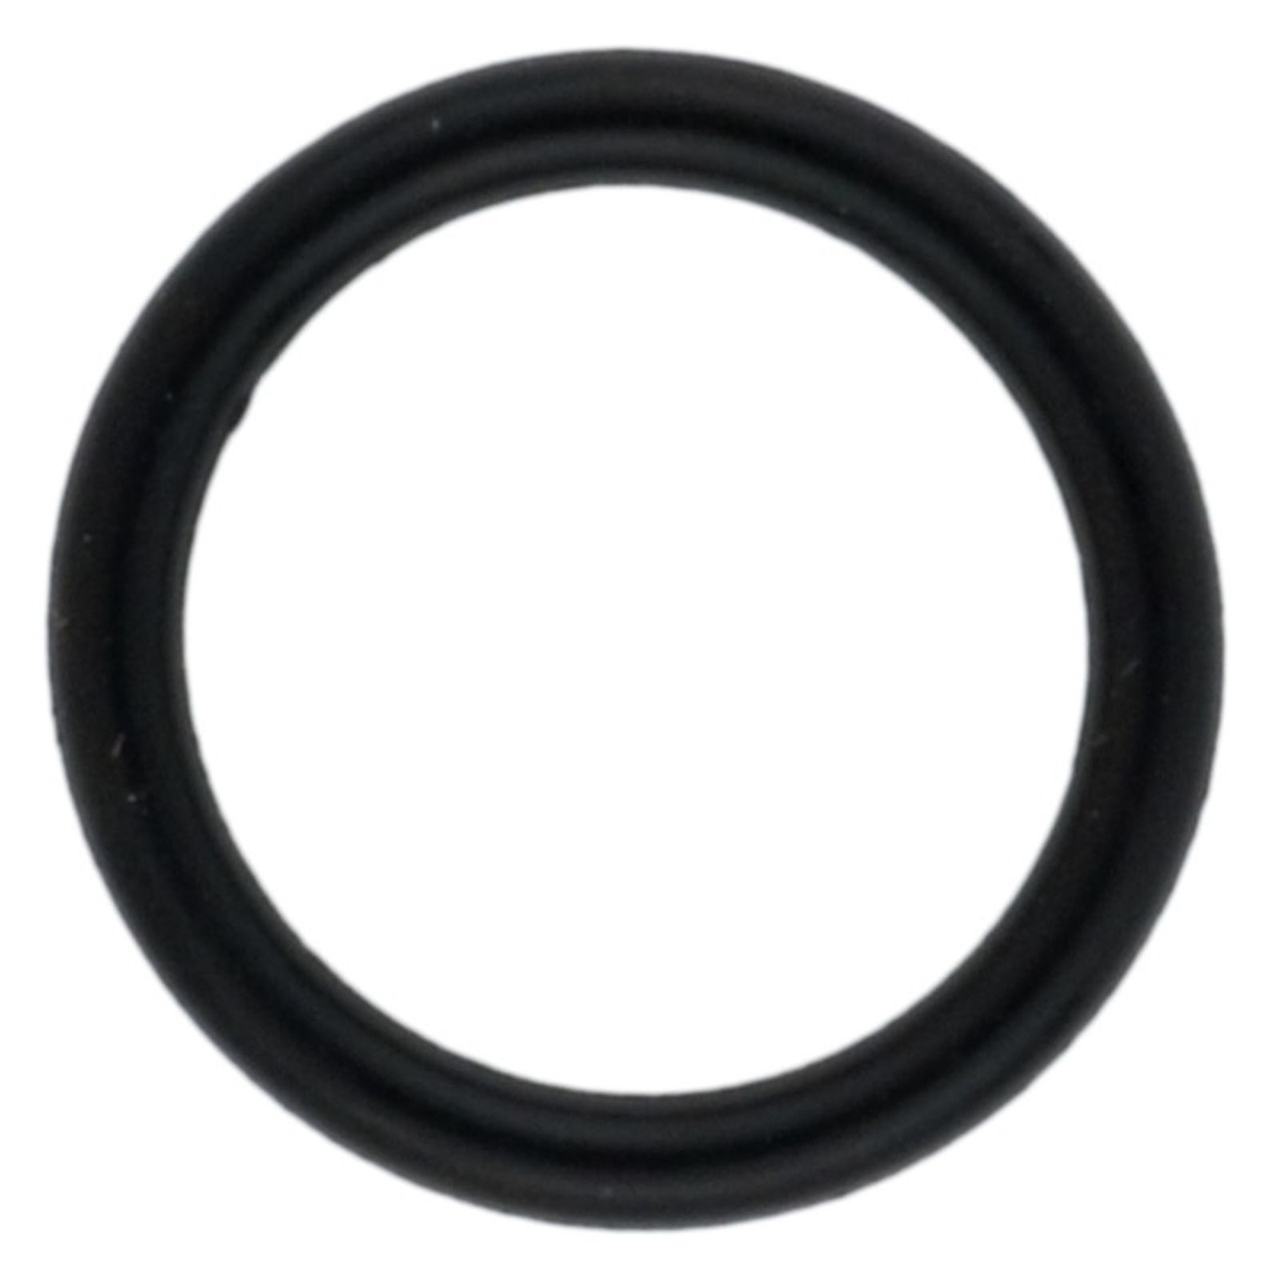 O-Ring for Lever SR250, XT250, SR500, TT500, XT500 (Damper-Ring for Reducing the Play between Lever and Perch, suitable for Item 33003, 10010, 33050, 29120, 11004, 33061)